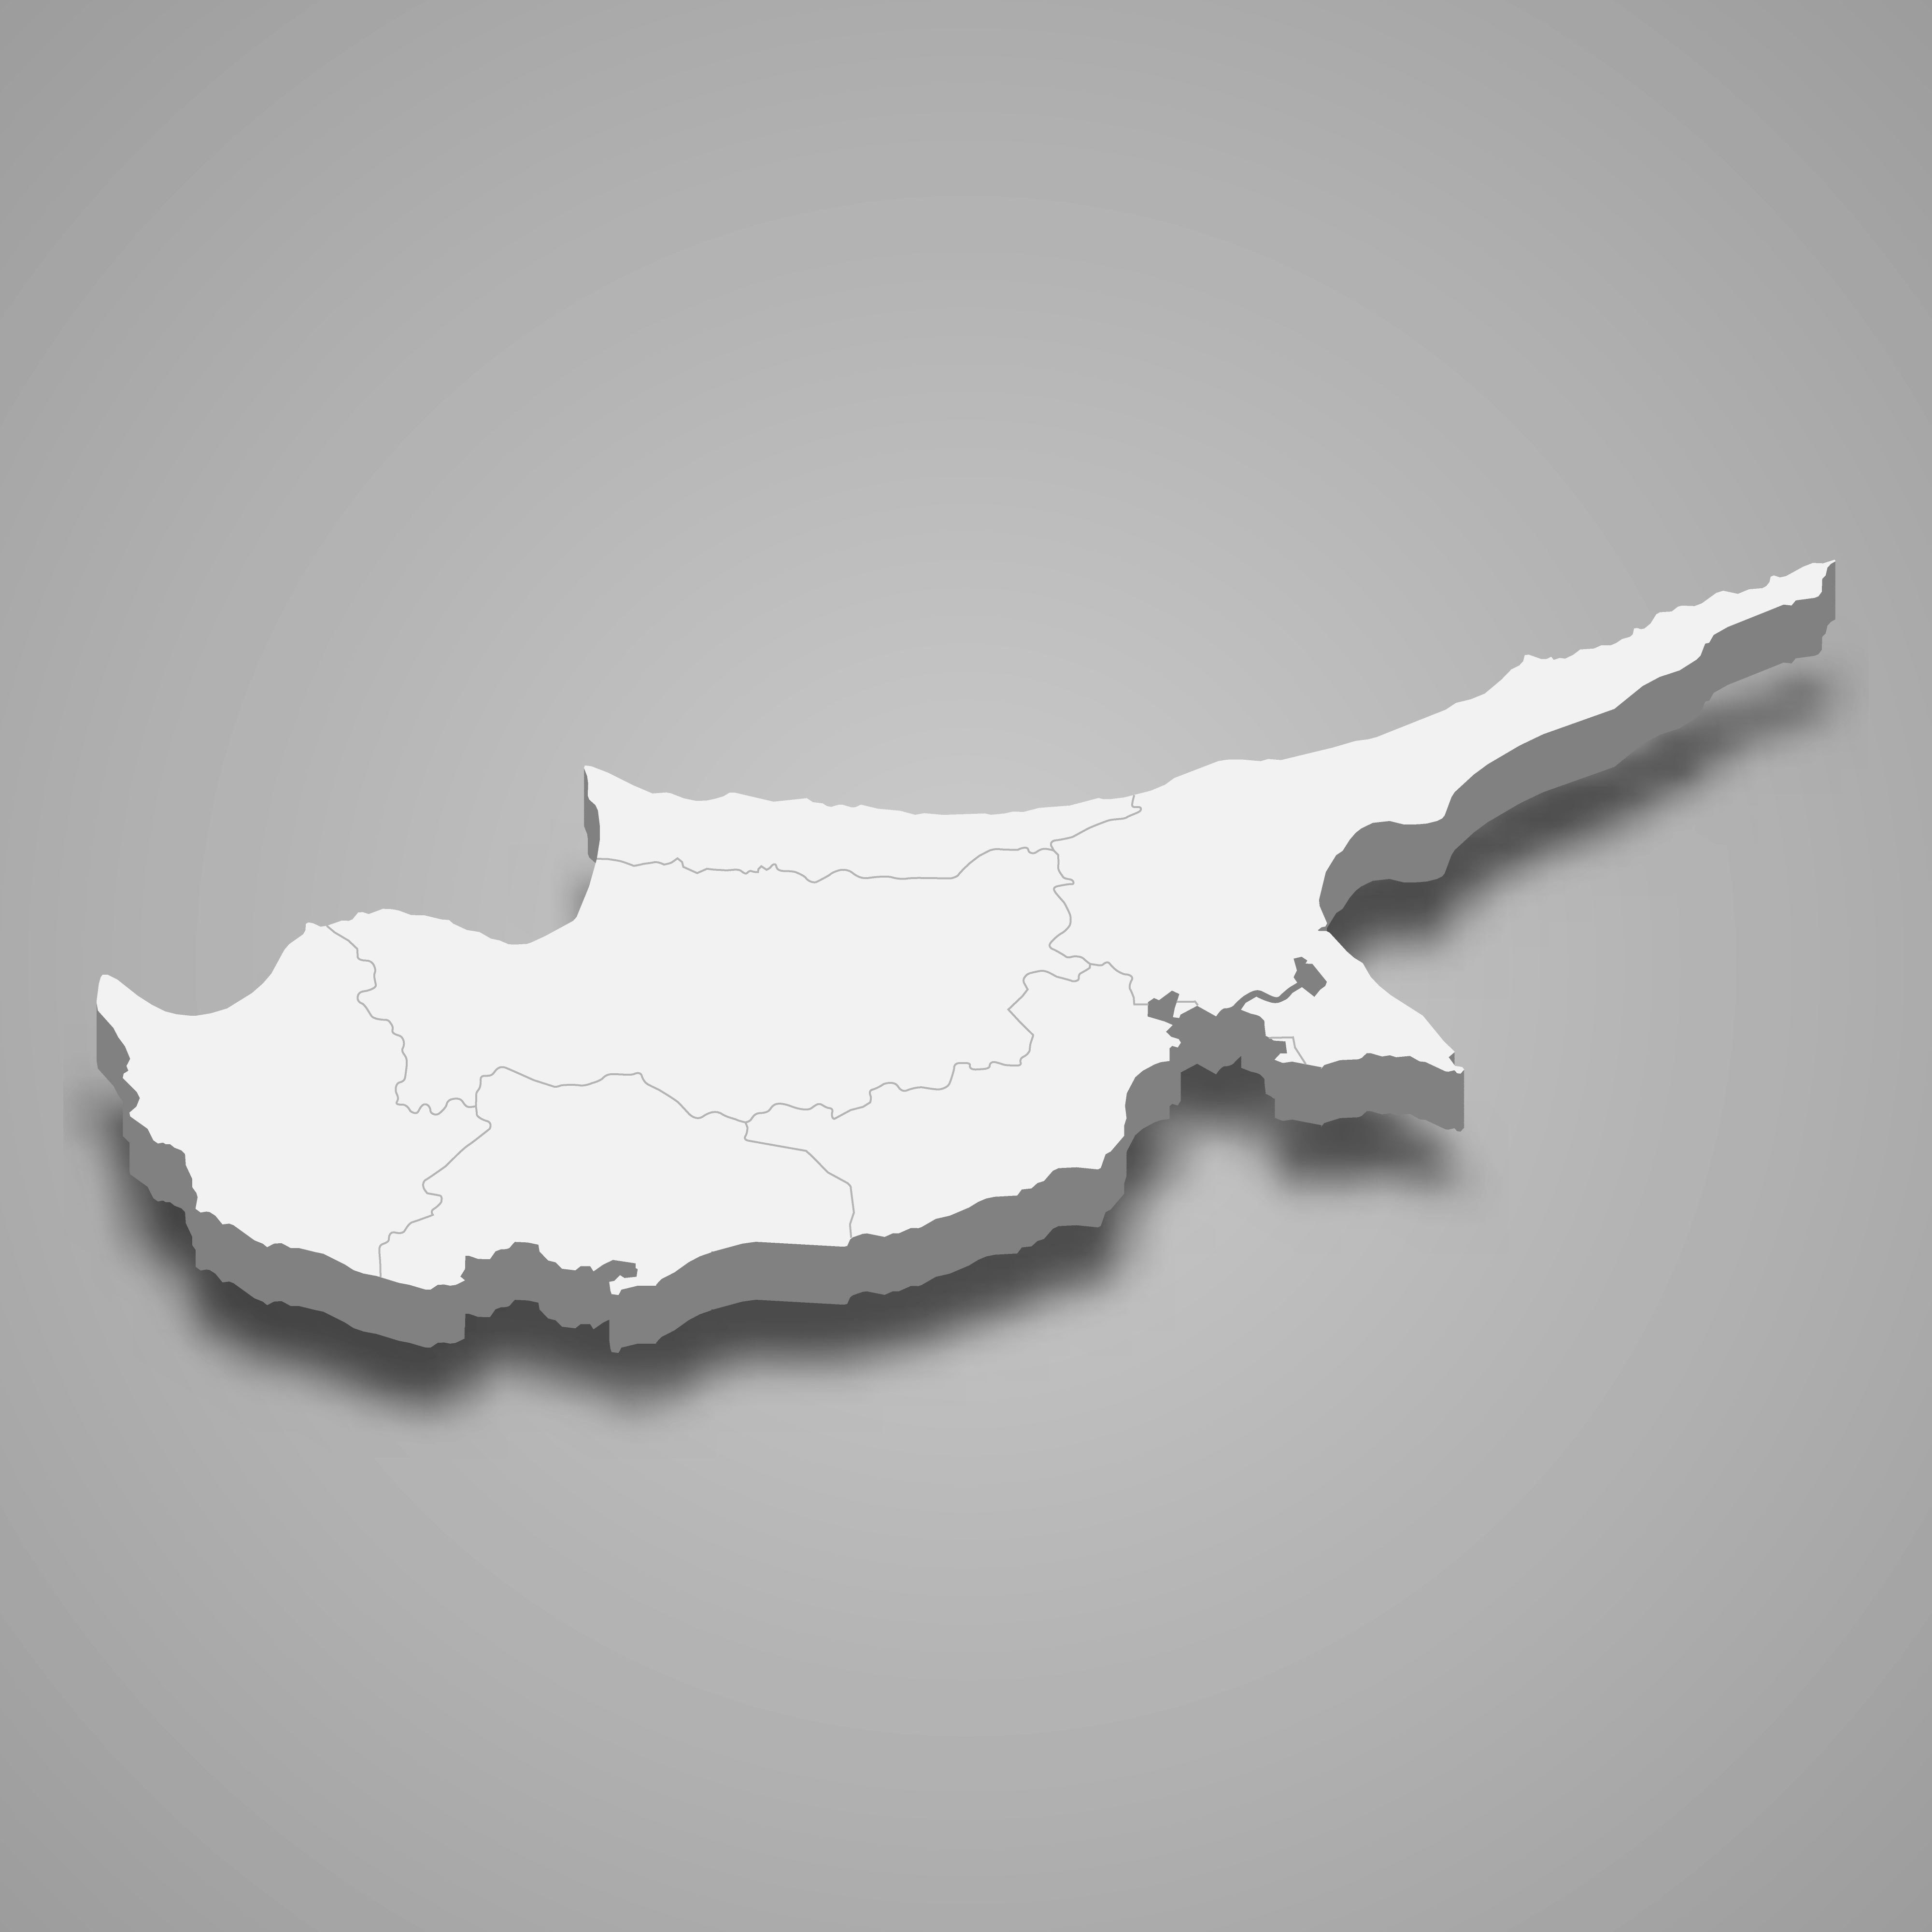 3d map of Cyprus with borders of regions. 3d map with borders Template for your design